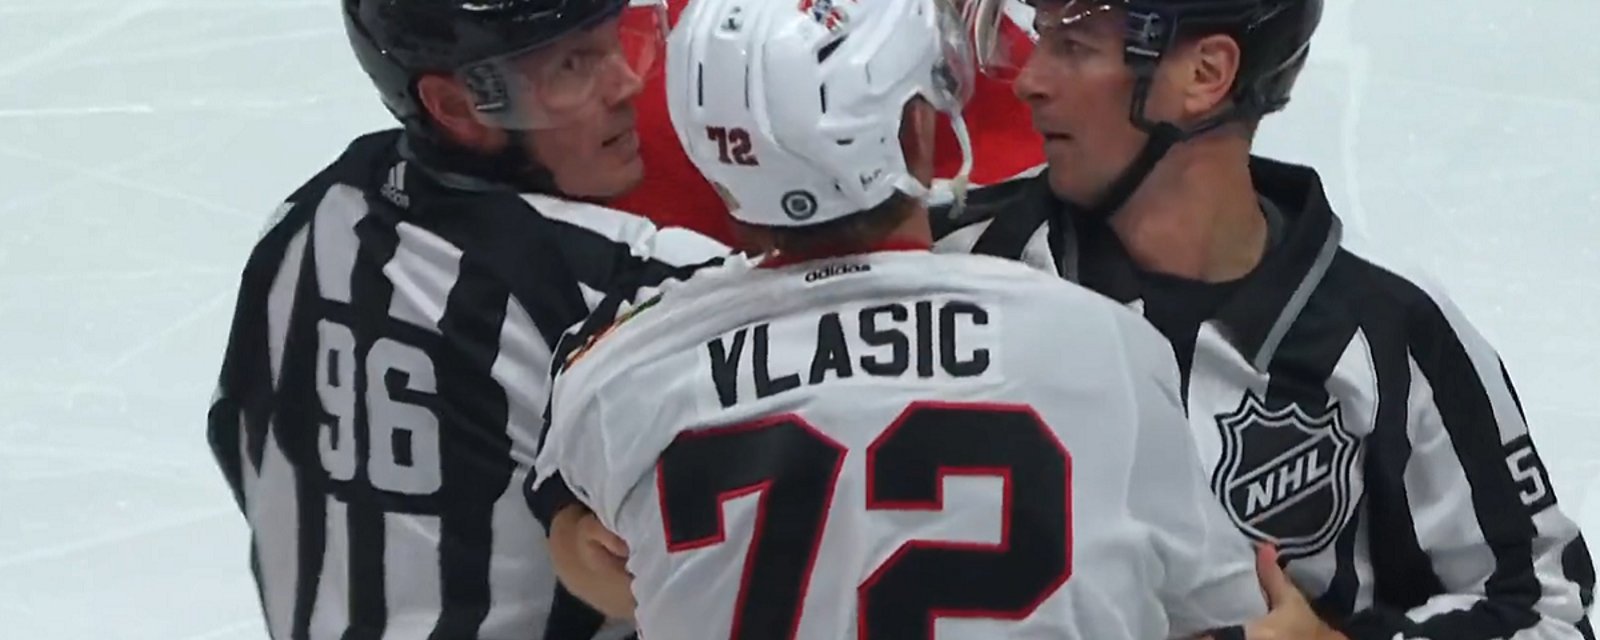 Alex Vlasic ejected for knee on knee in the preseason.